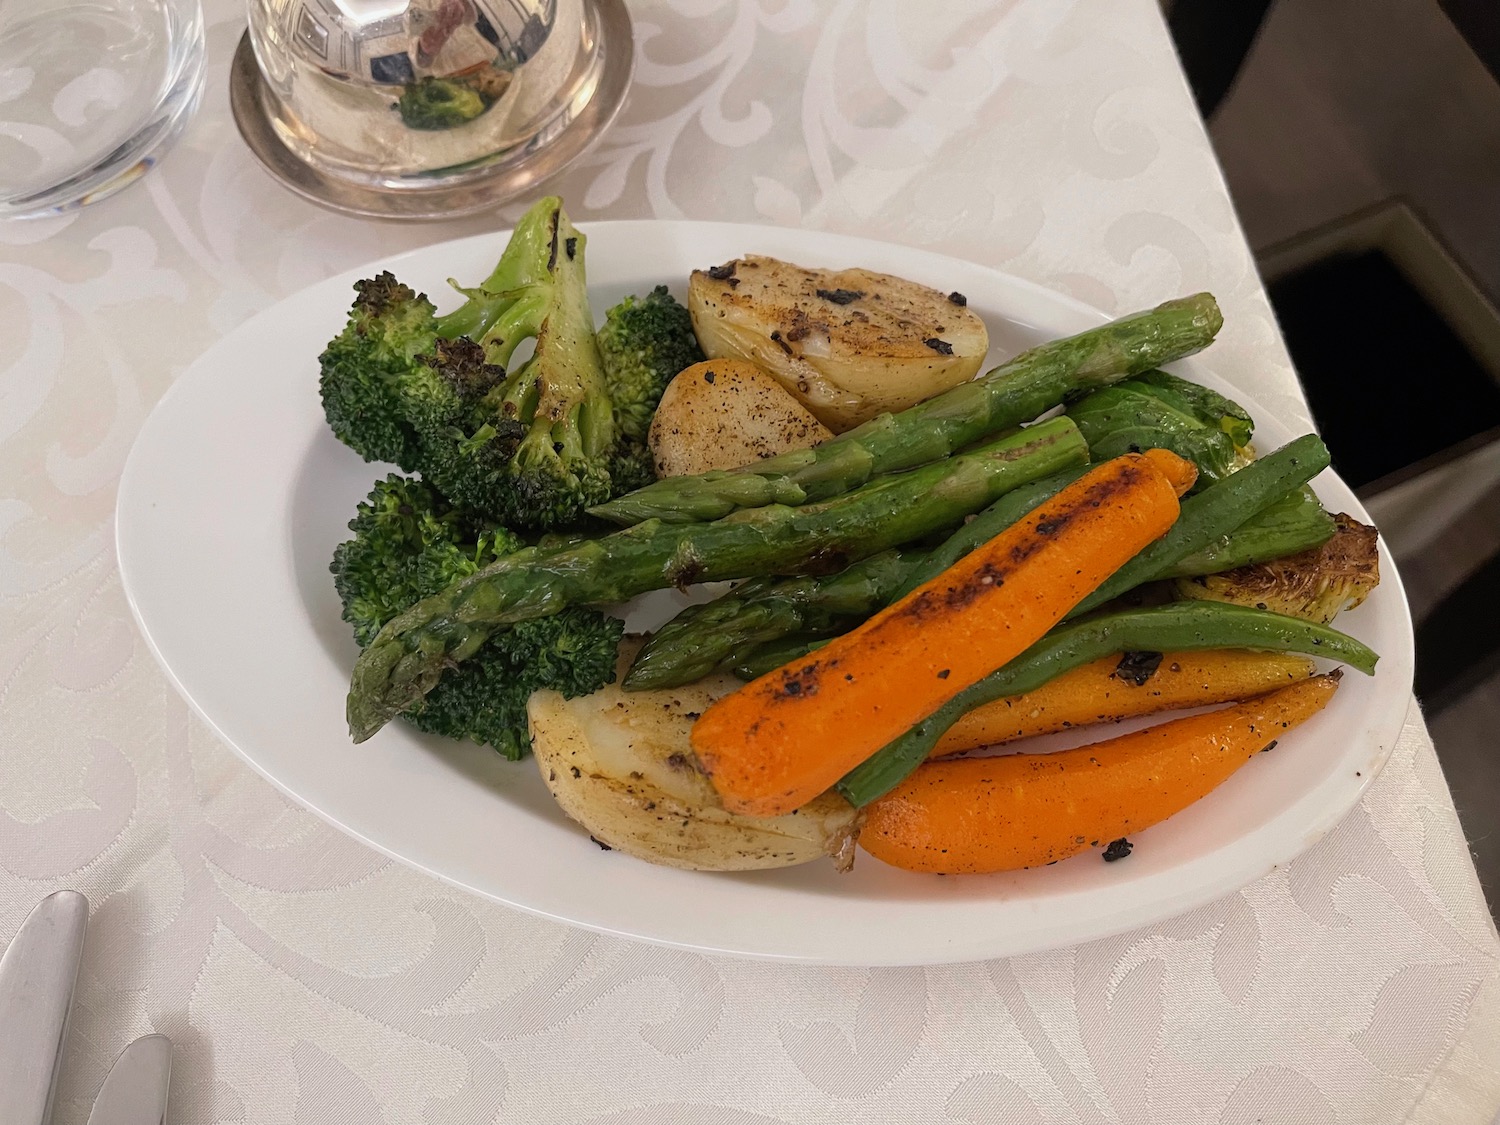 a plate of vegetables on a table